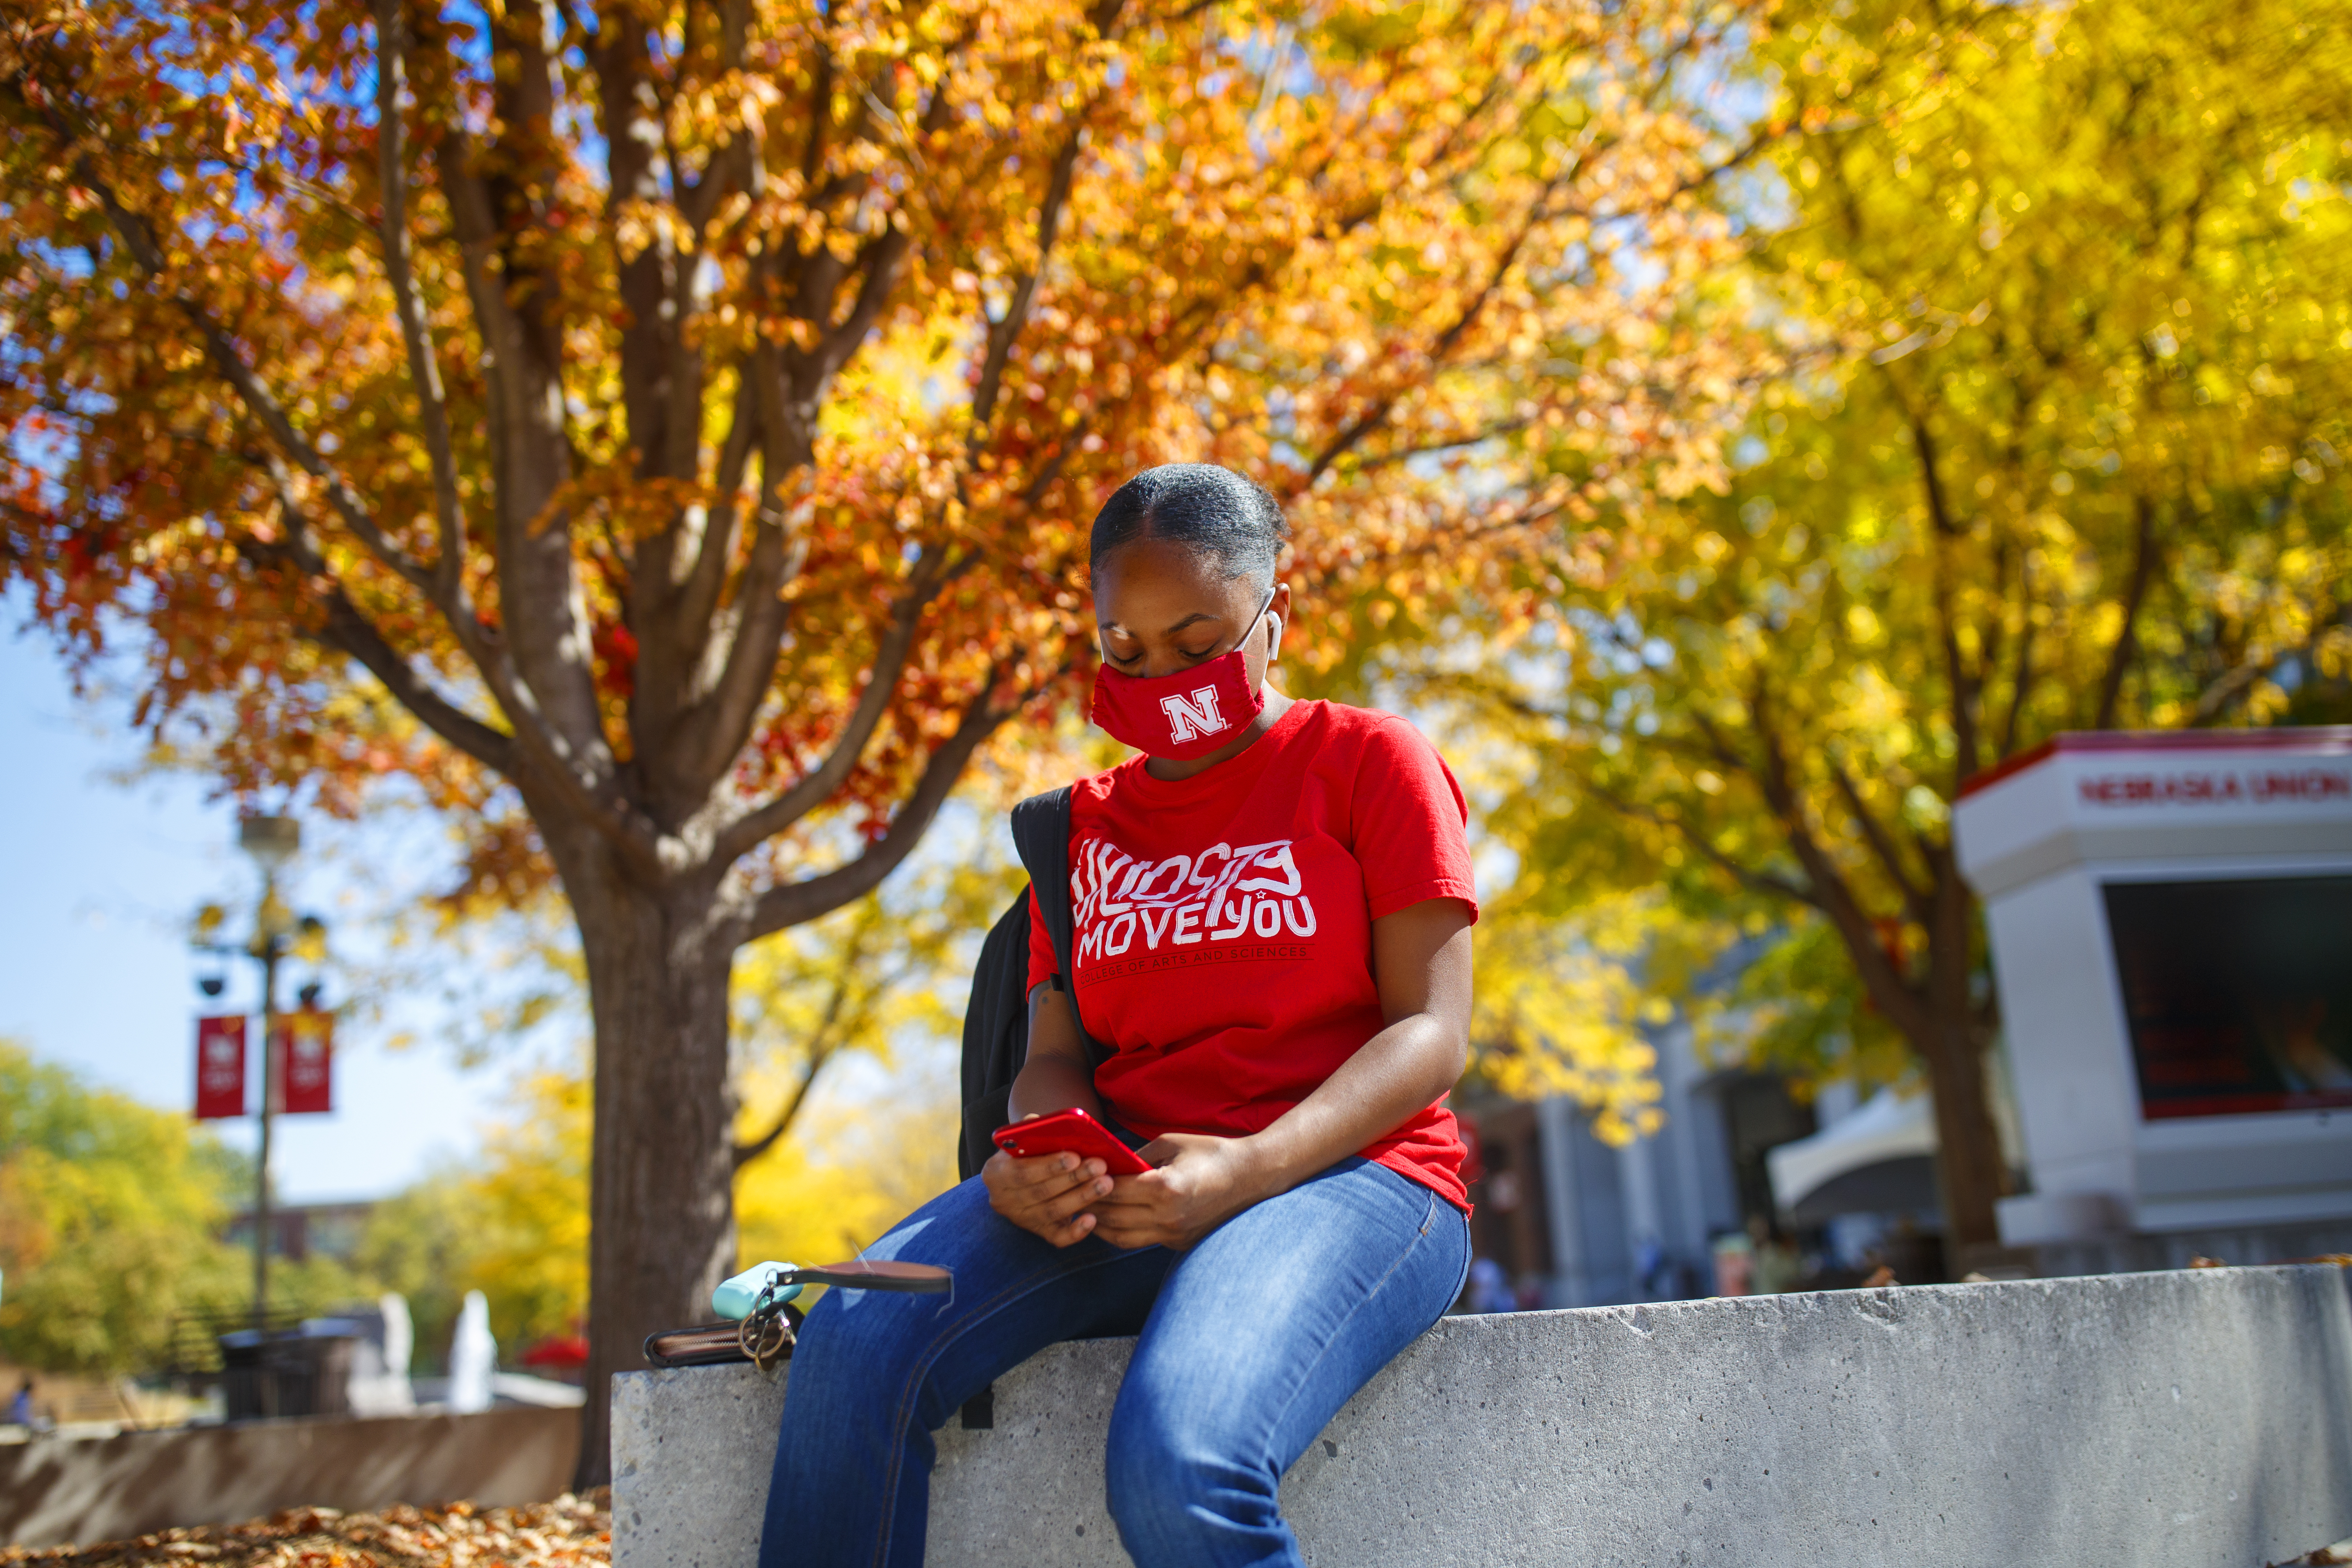 Review the Fall 2021 COVID-19 Checklist to get ready for the fall semester.